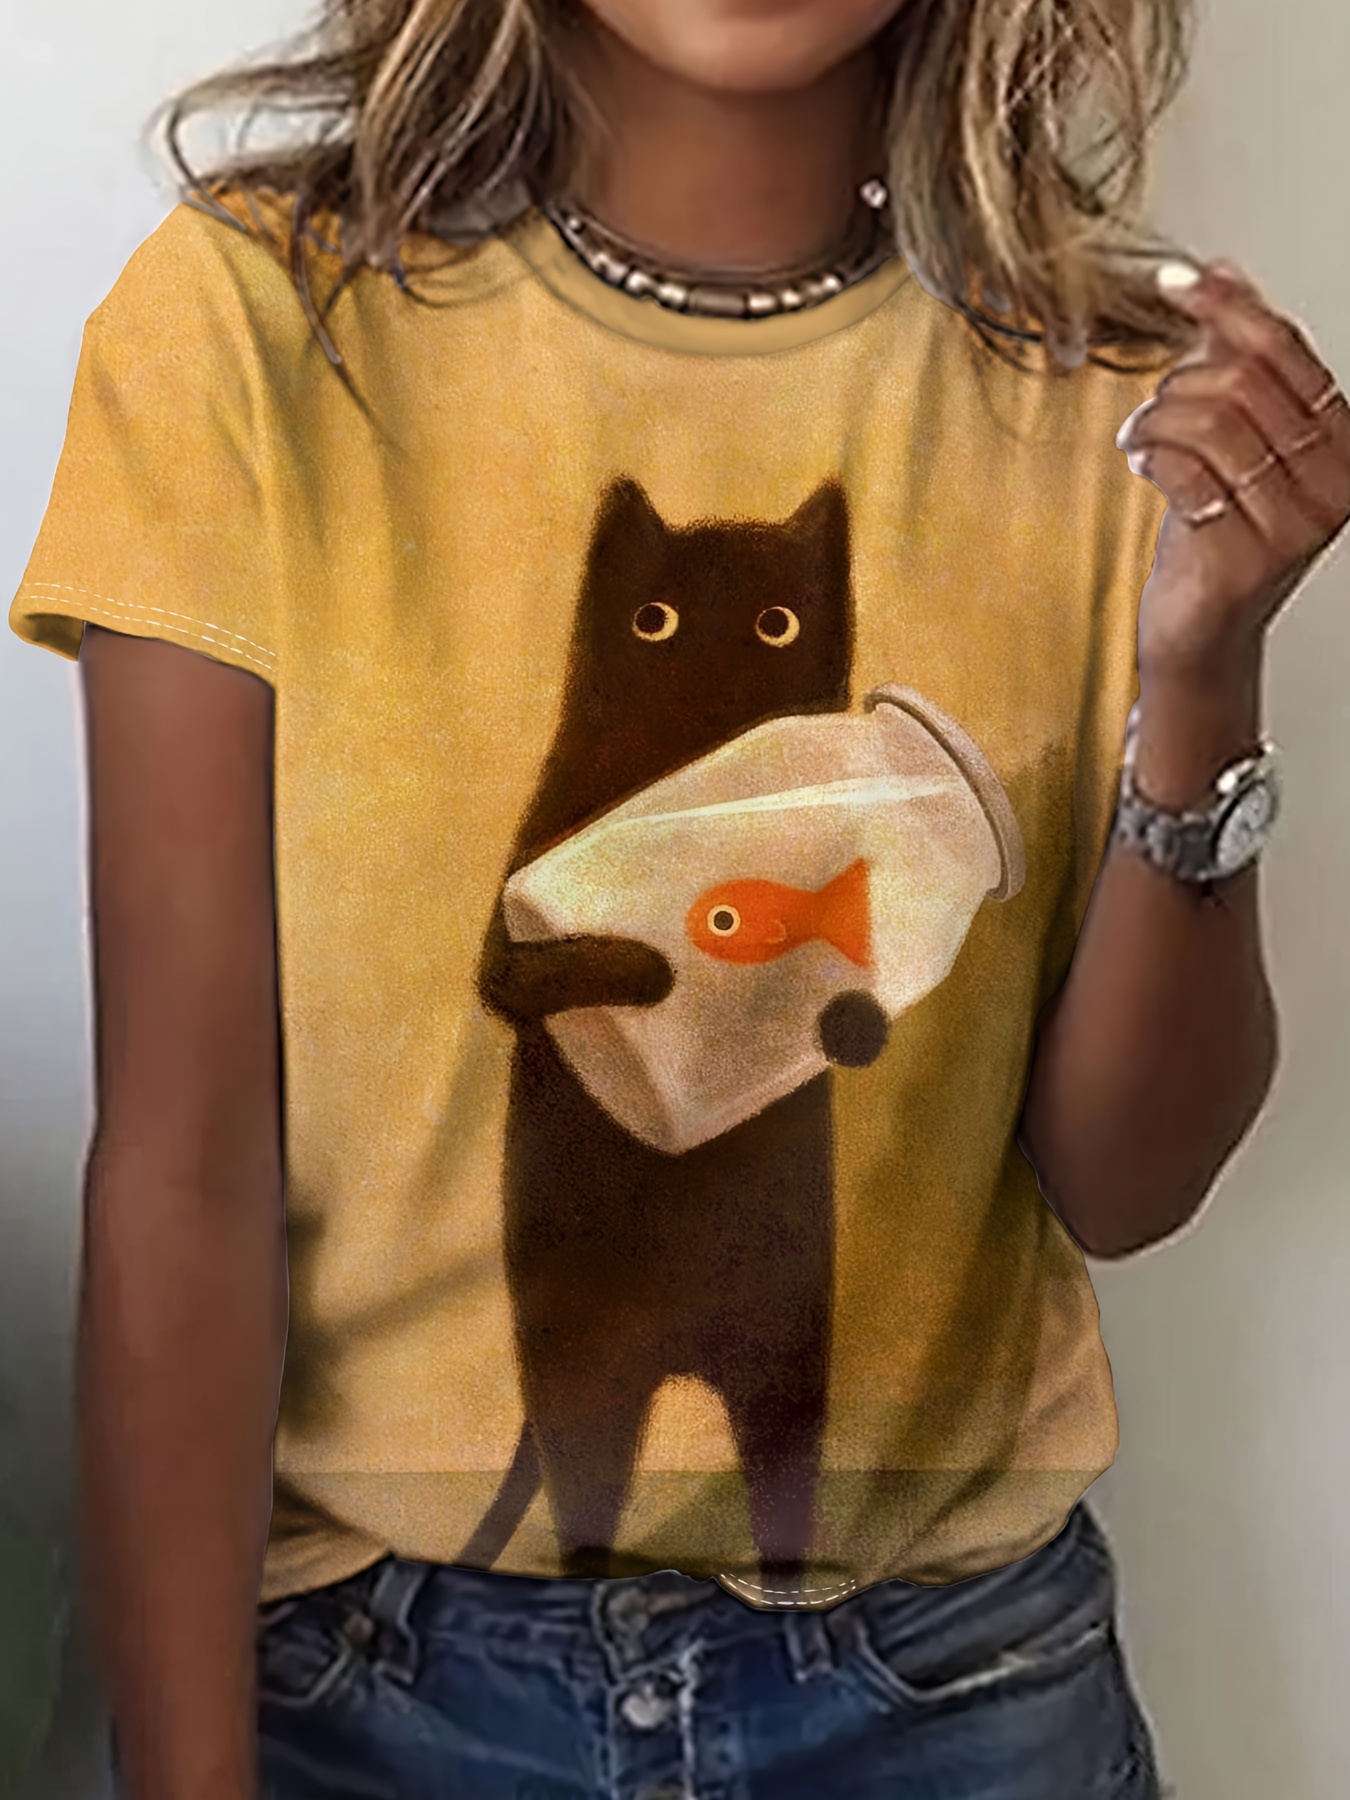 Fish & Cat Print Crew Neck T-Shirt, Casual Short Sleeve T-Shirt For Spring & Summer, Women's Clothing